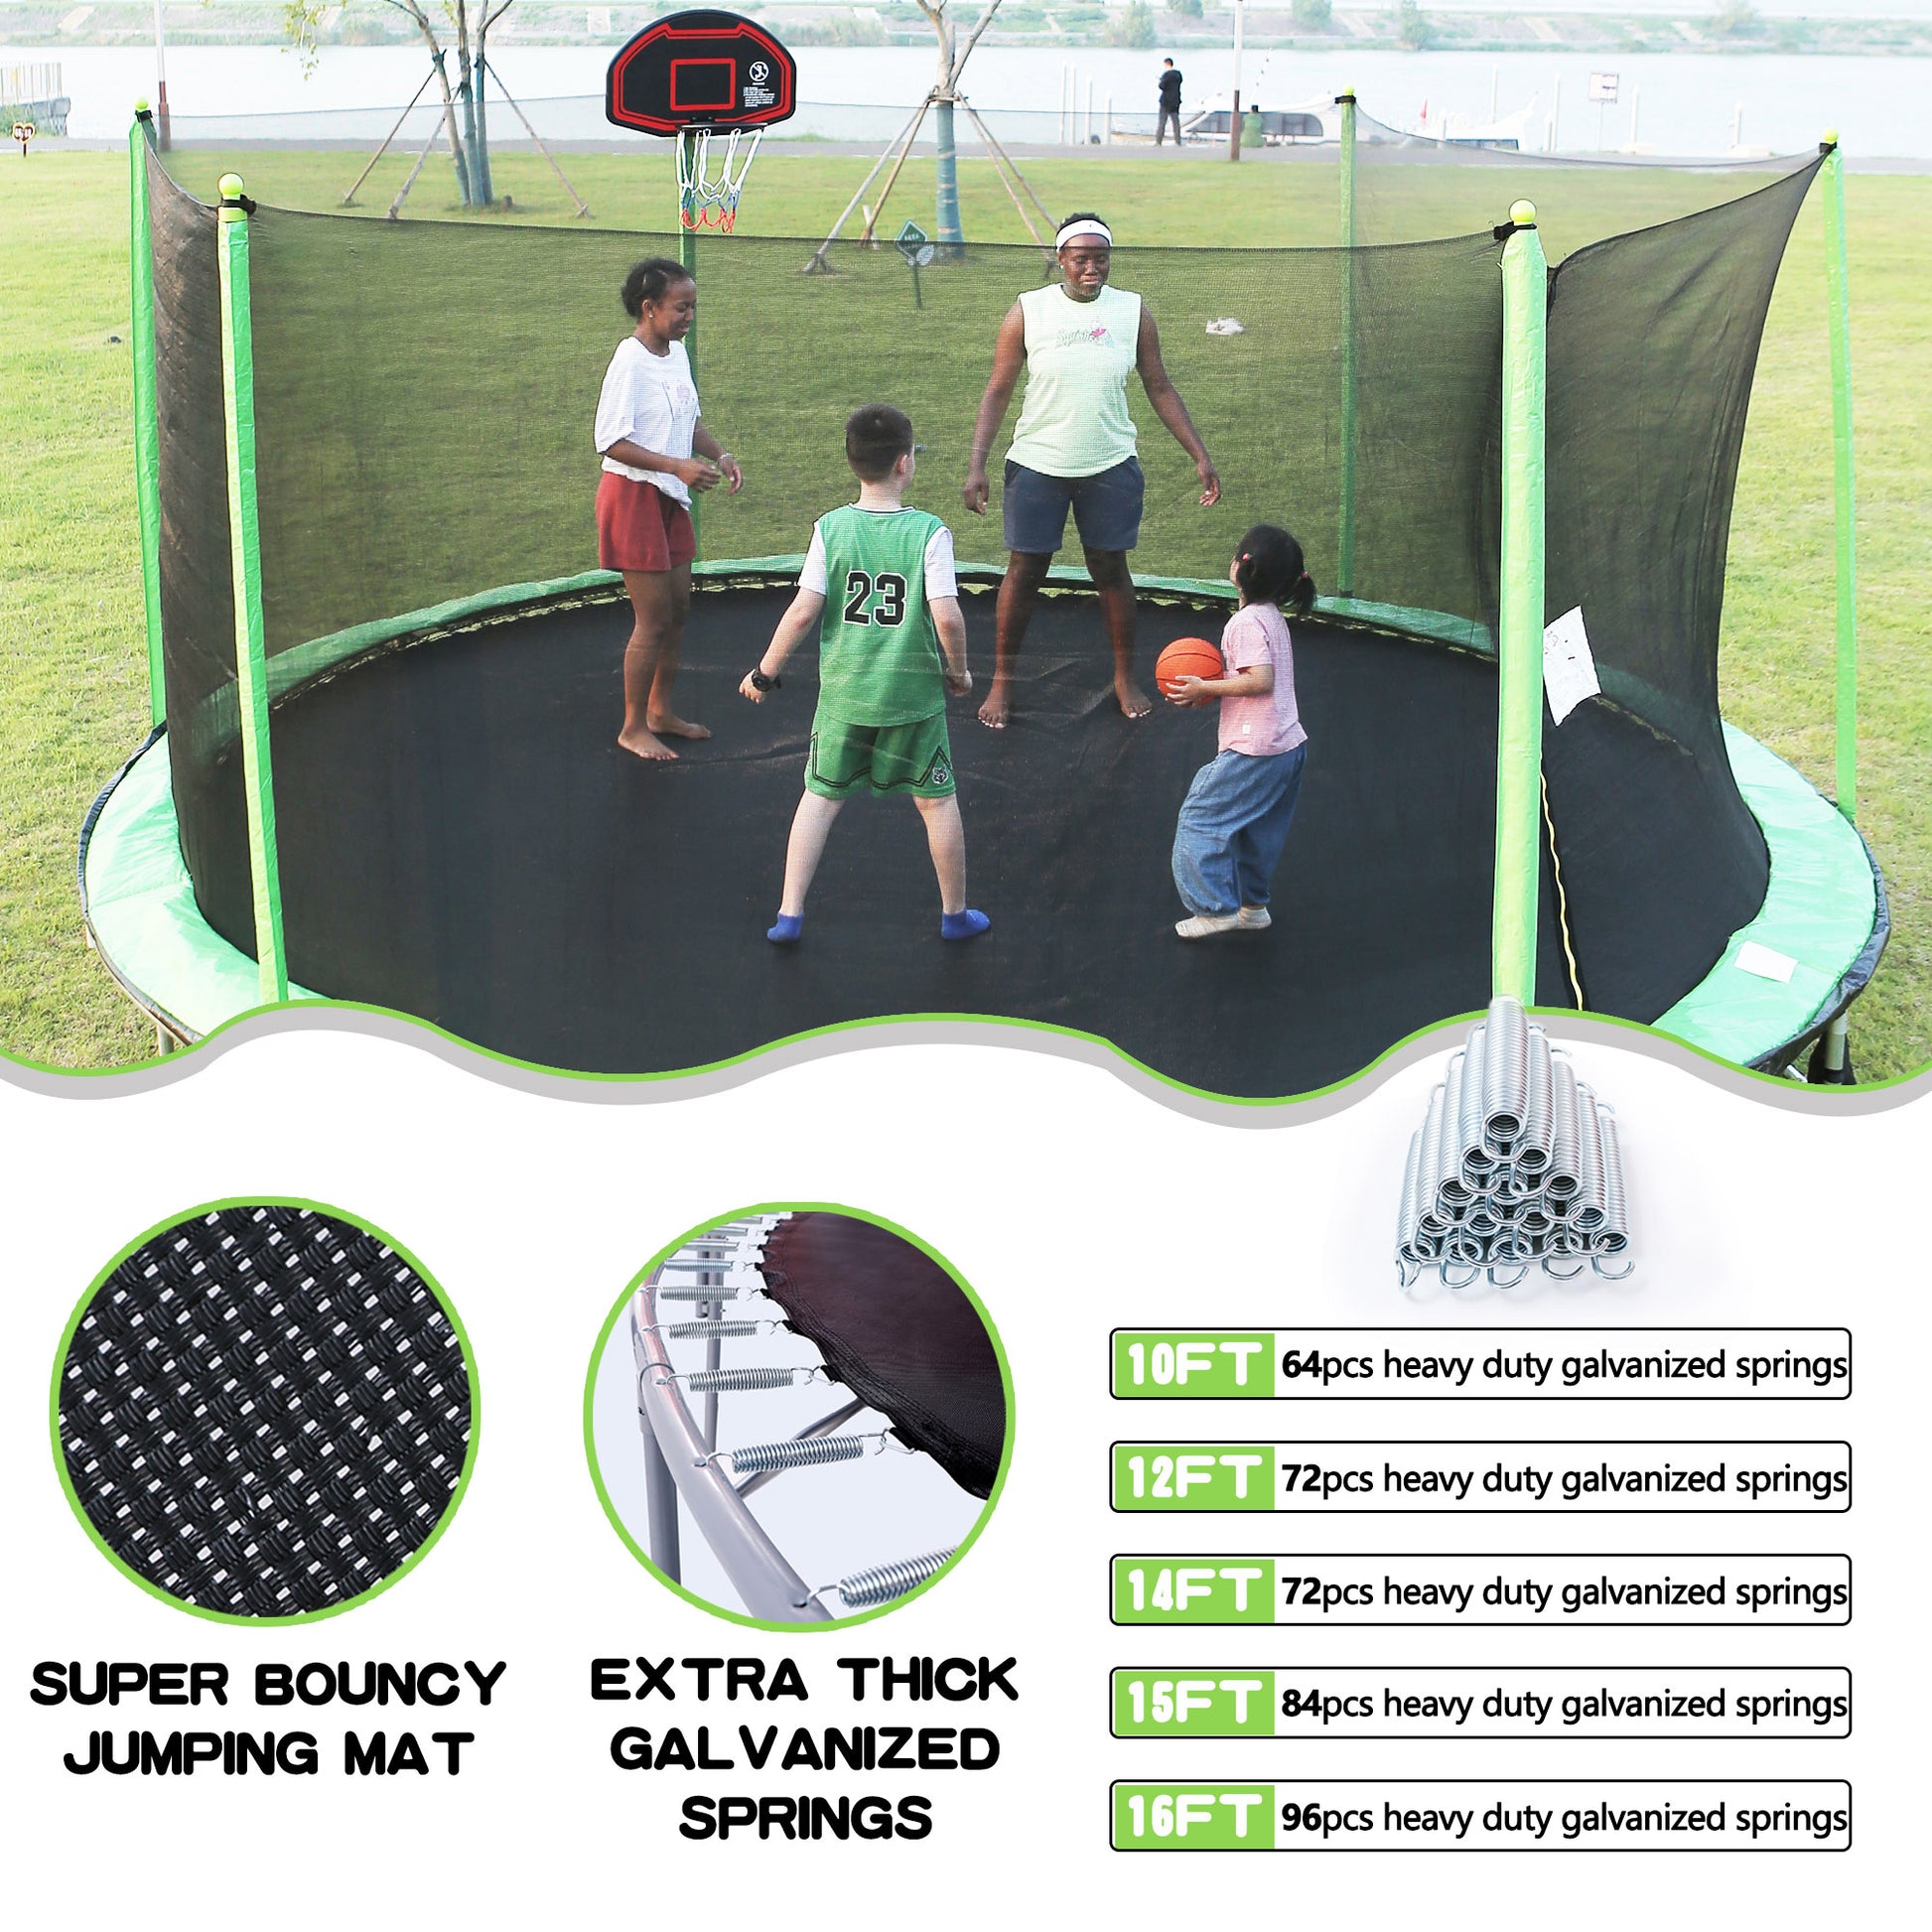 One adult and three children playing basketball on a trampoline and underneath it says, super bounce mat and Extra thick galvanized spring, Next to it says, 10ft has 64 springs, 12ft has 72 springs, 14ft has 72 springs, 15ft has 84 springs, 16ft has 96 springs